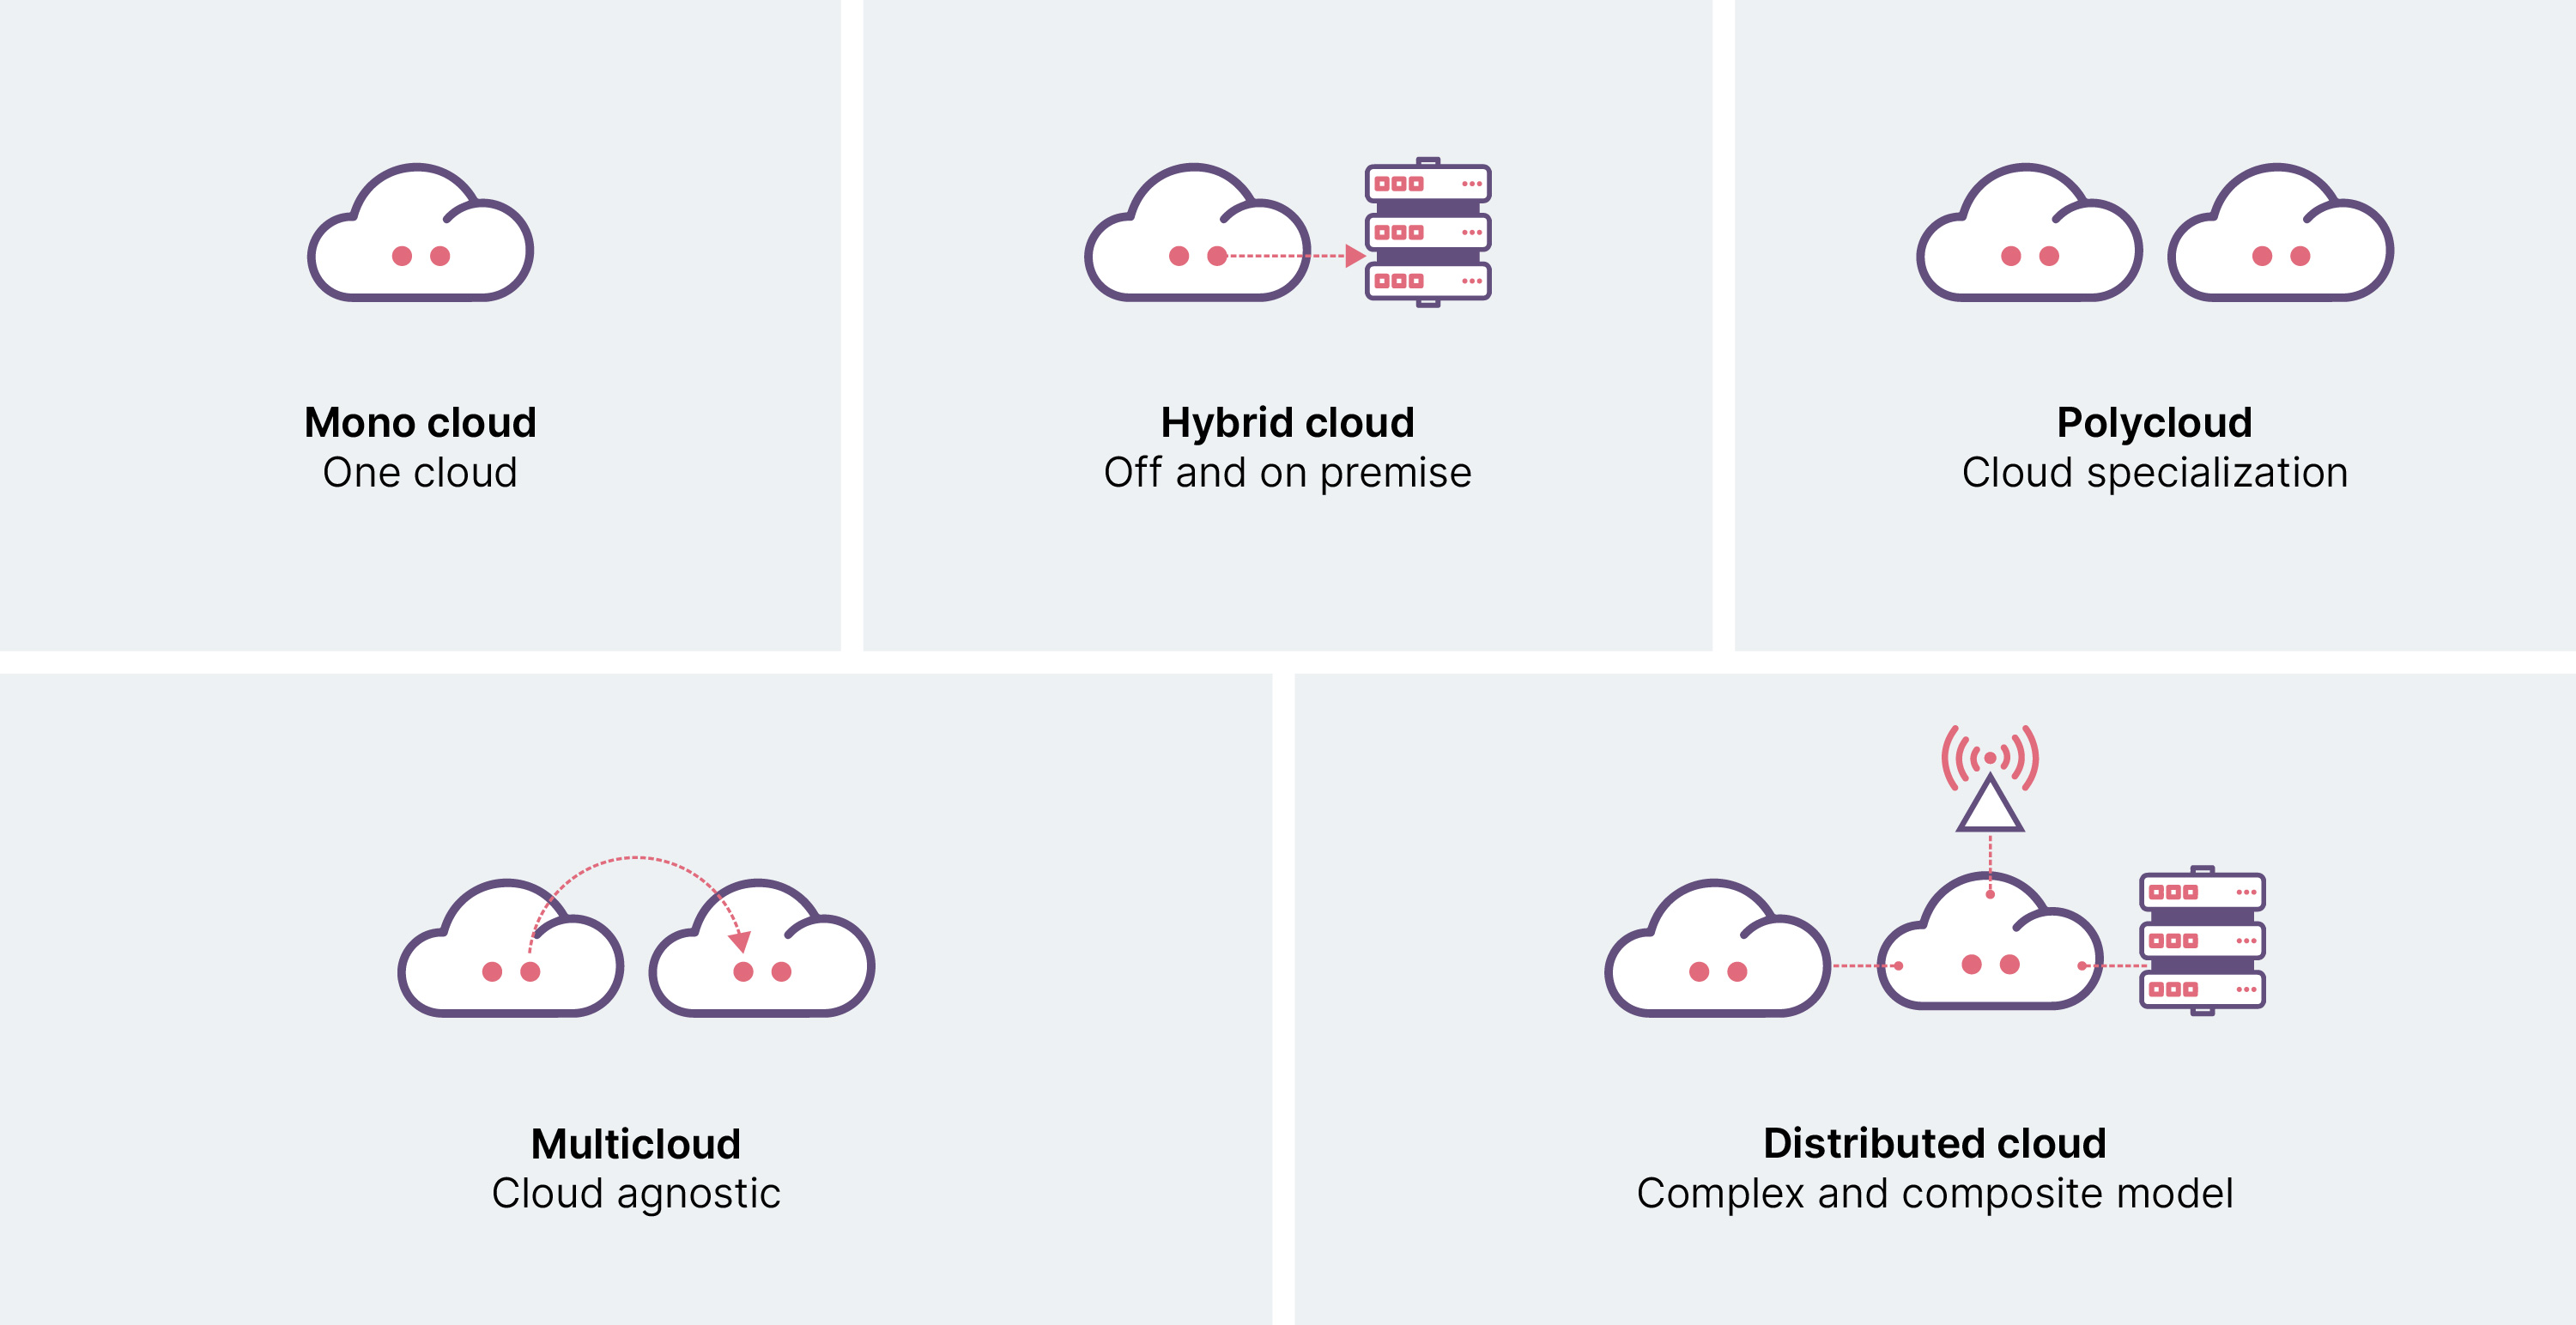 5 different cloud models ranging from one cloud, hybrid cloud, poly cloud, multi cloud & distributed cloud.